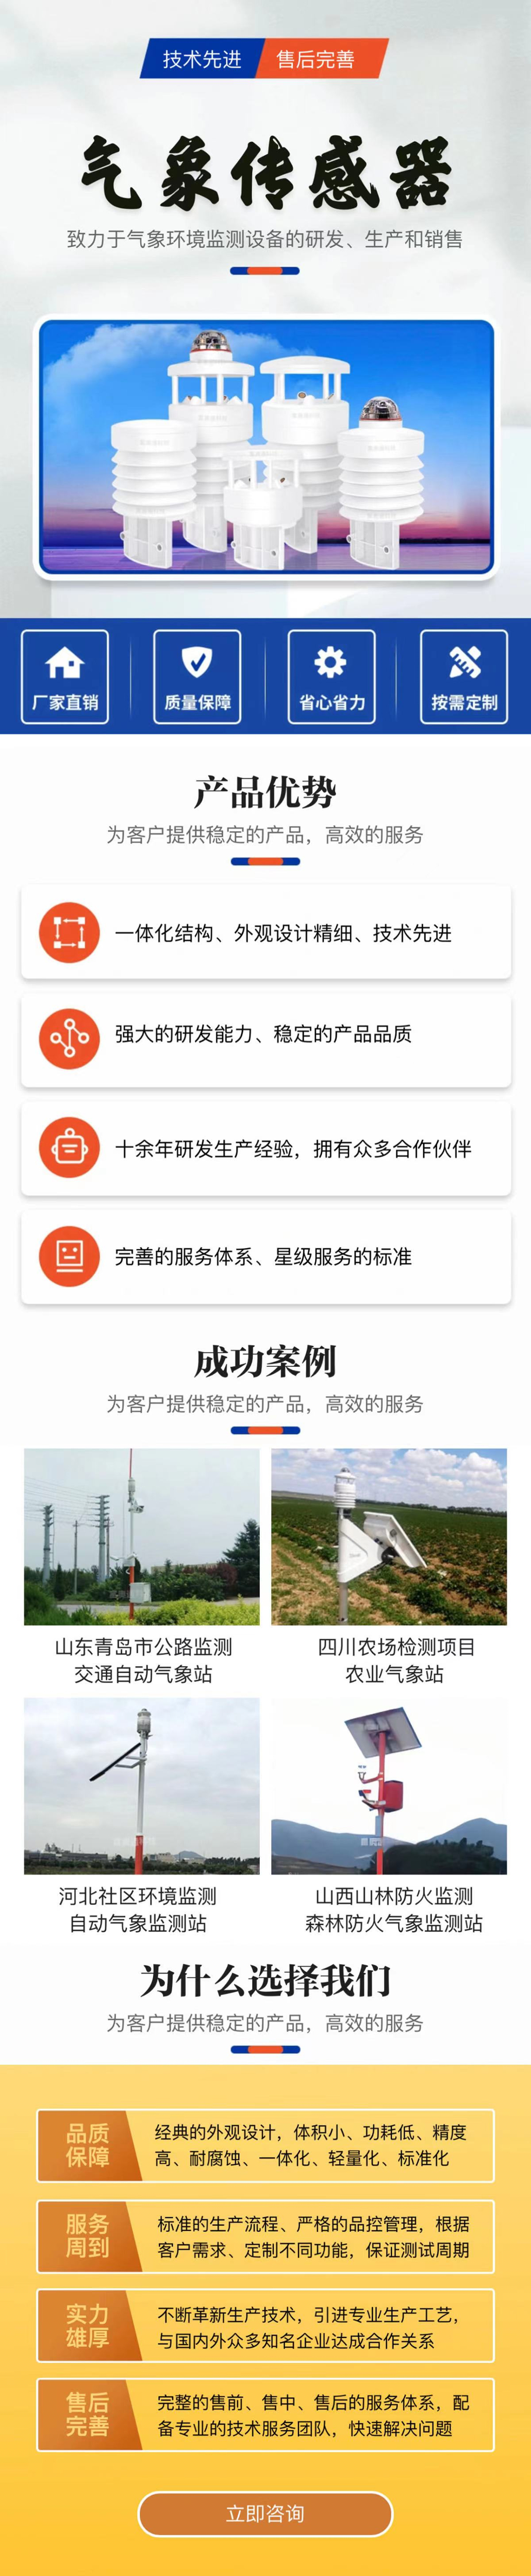 Ultrasonic wind direction and wind speed sensor - Principles of ultrasonic wind speed and wind direction instrument - Manufacturer of Fuaotong Meteorological Station